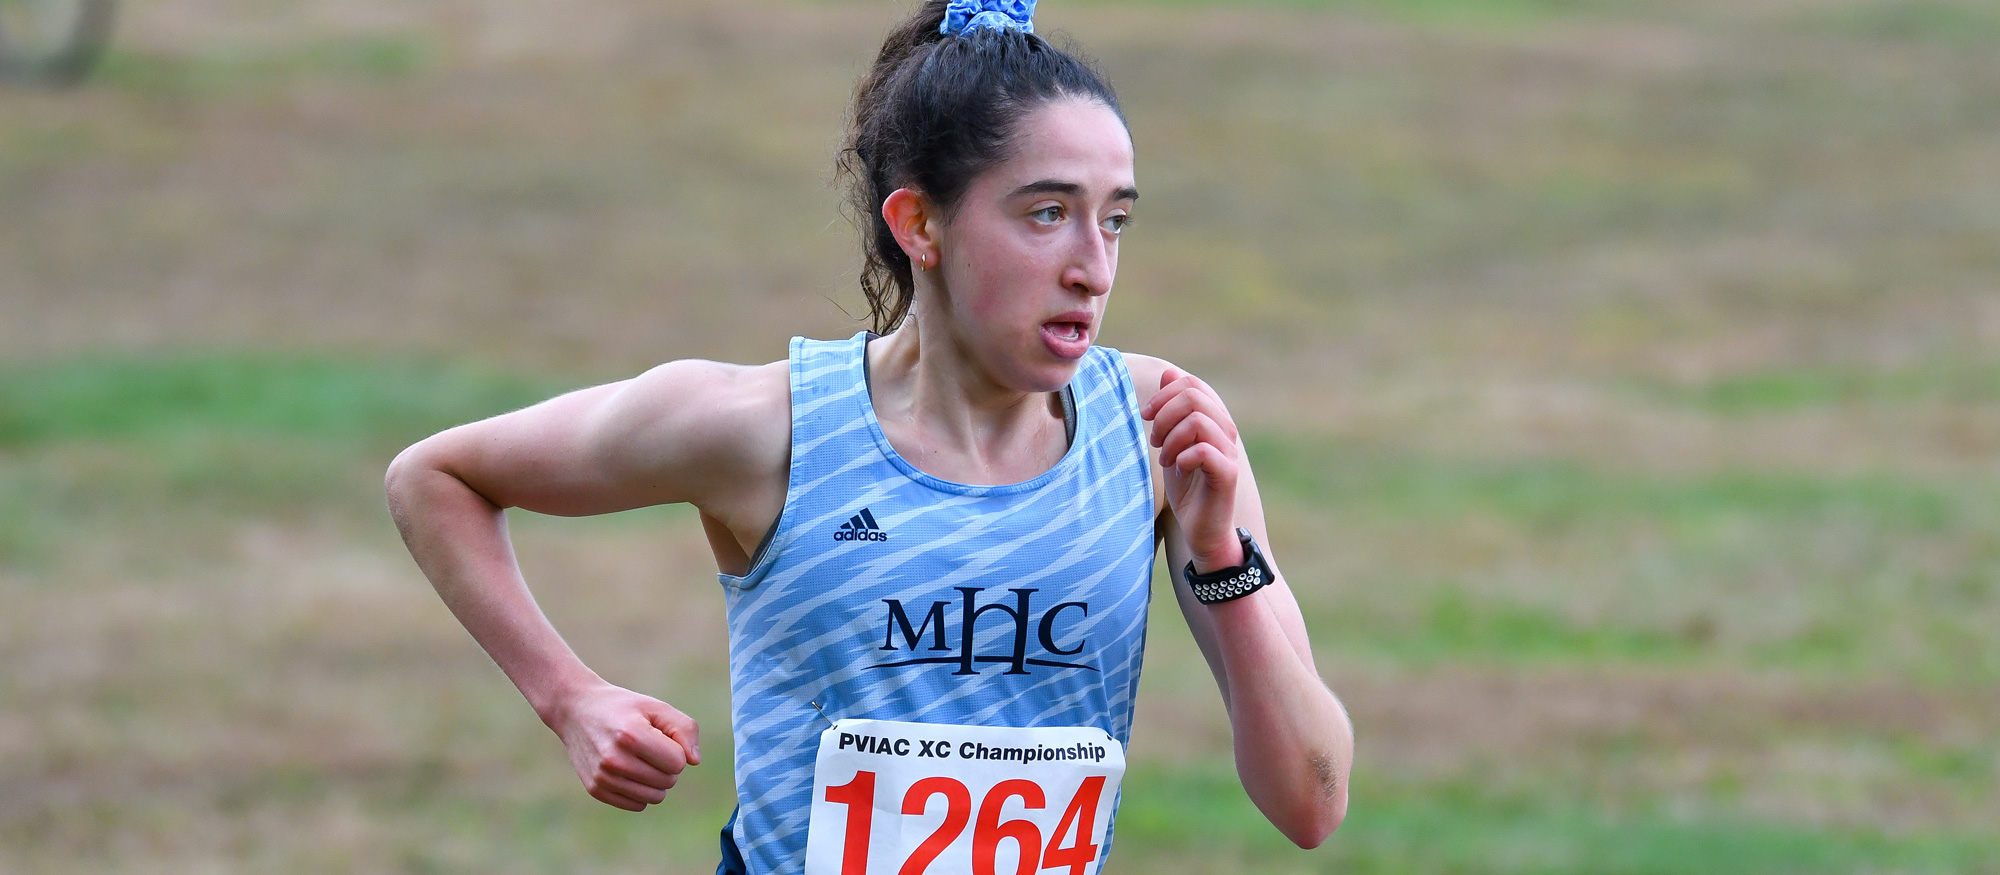 Lauren Selkin finished second out of 121 runners in the Purple Valley Classic on Oct. 1, 2022 in Williamstown, Mass. (RJB Sports file photo)